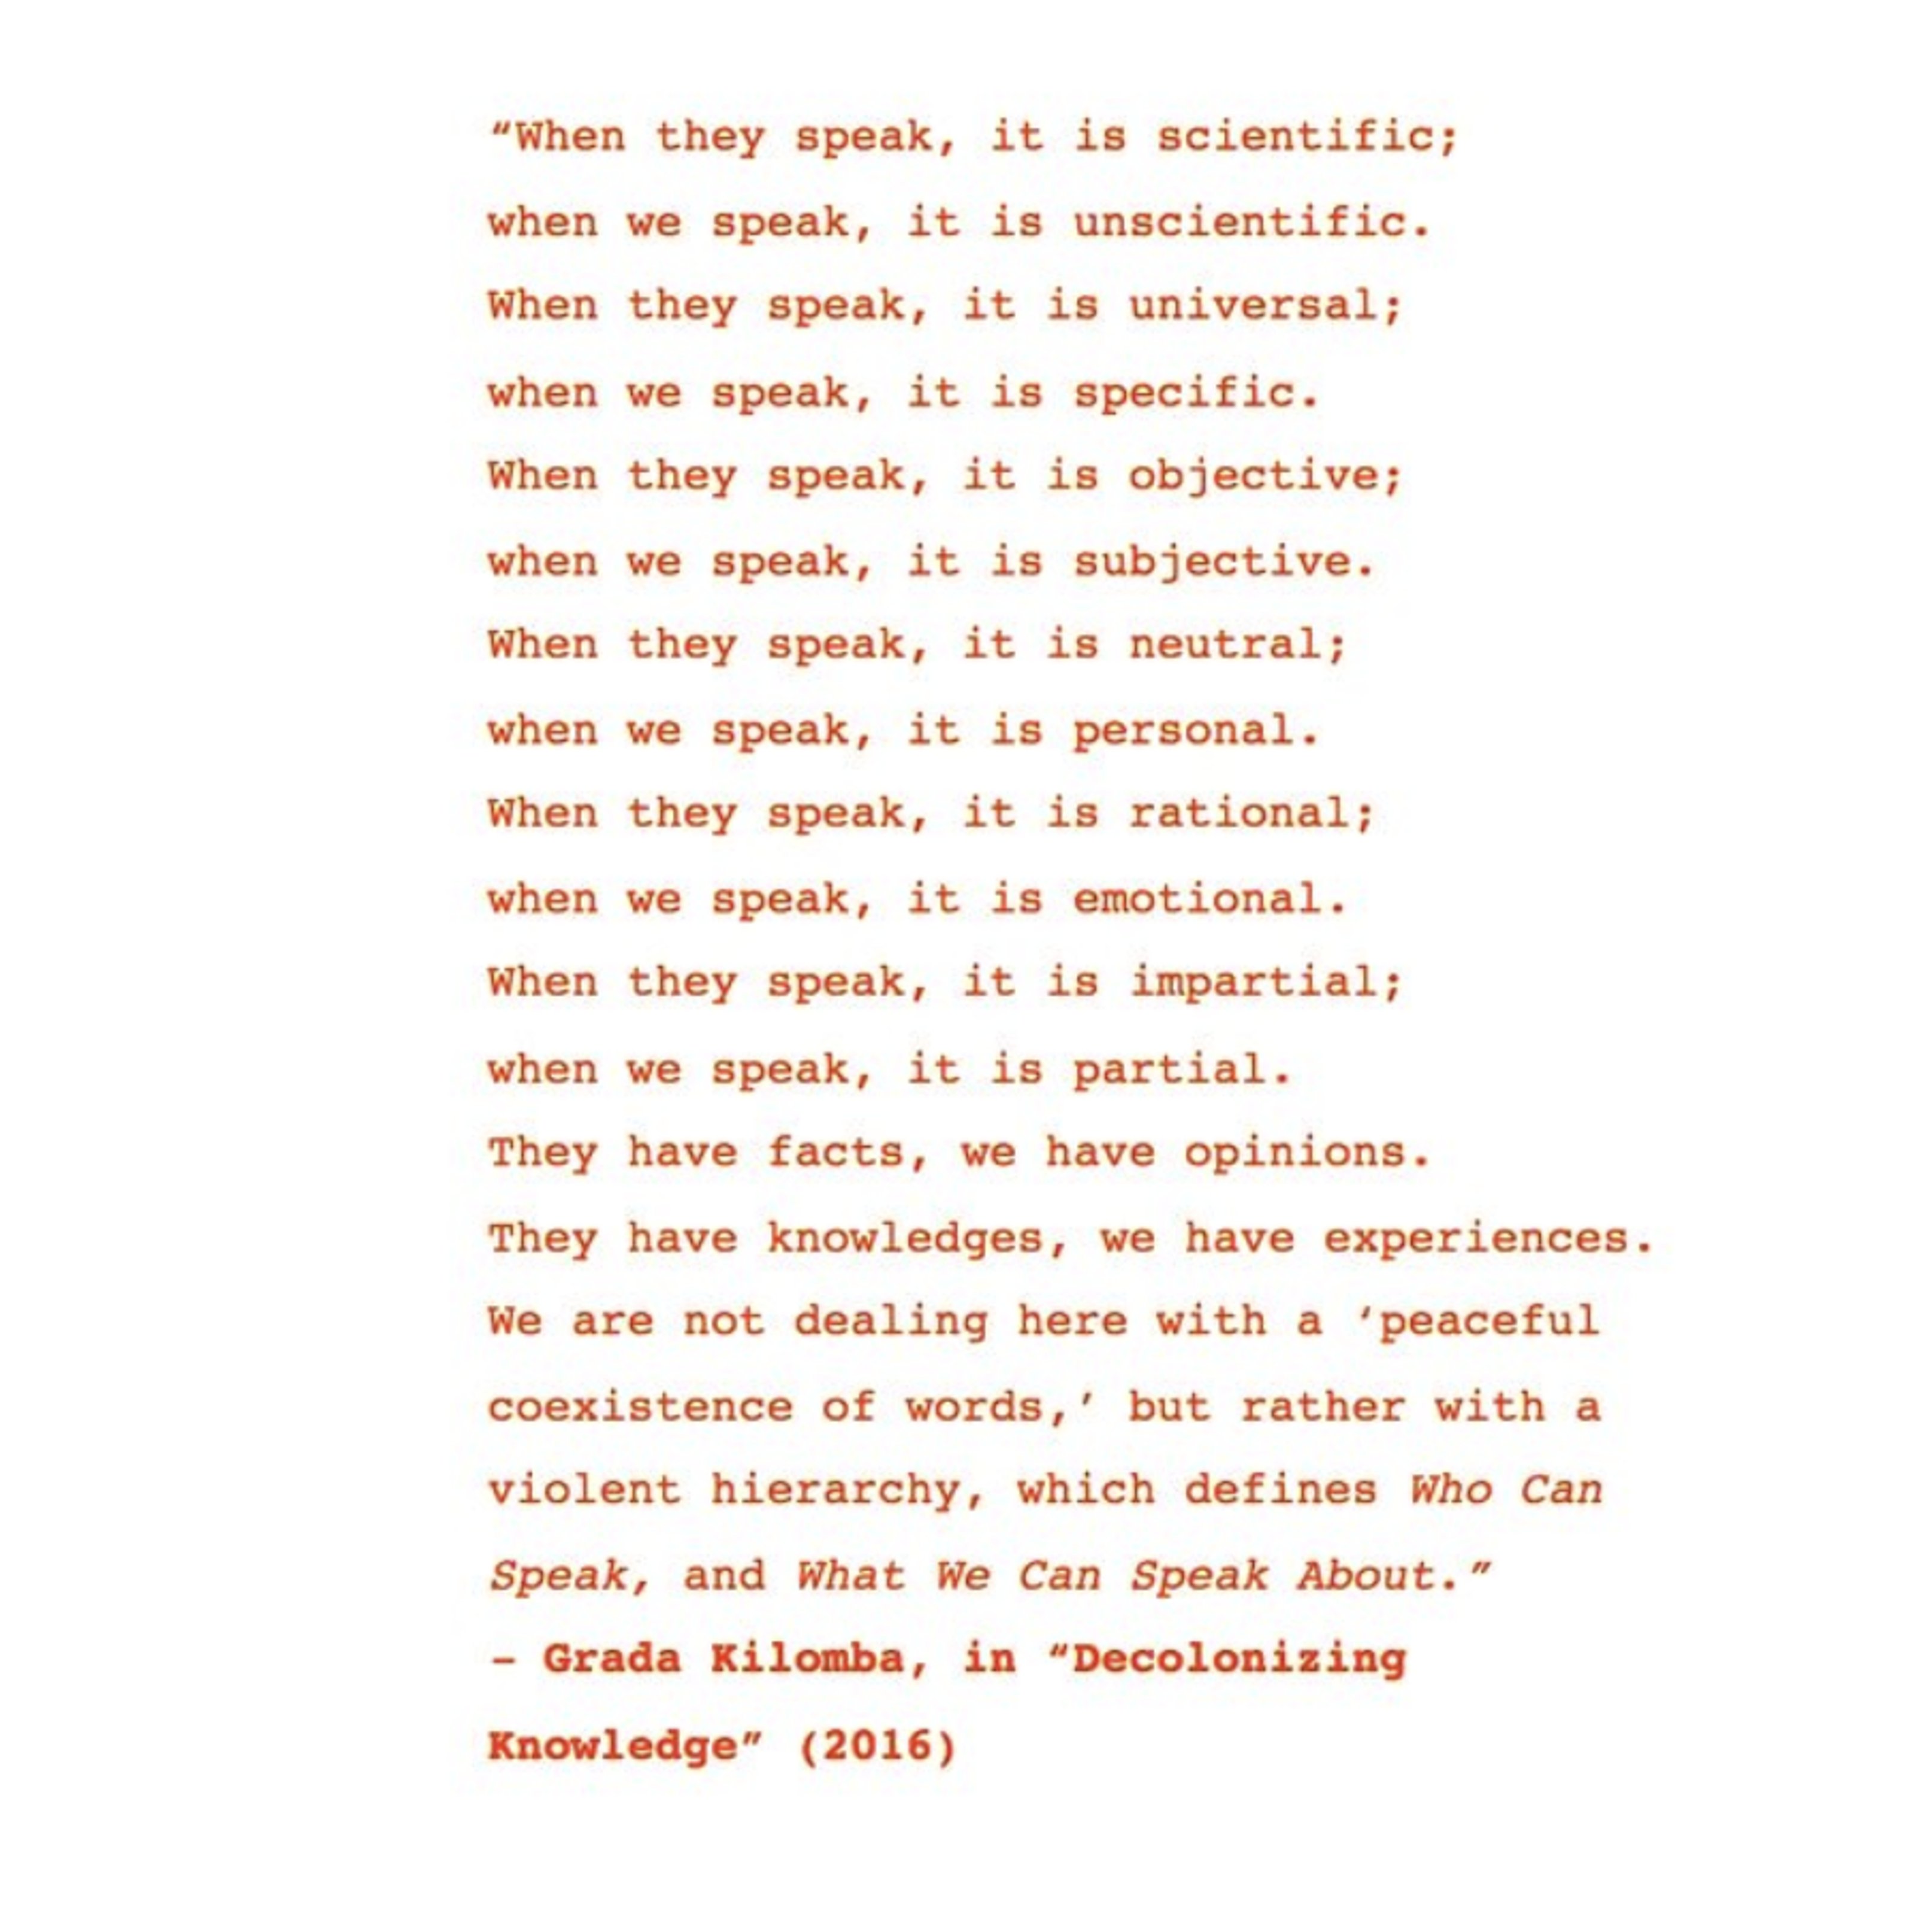 “when they speak, it is scientific; when we speak, it is unscientific. when they speak, it is universal; when we speak, it is specific. when they speak, it is objective. when we speak, it is subjective. when they speak, it is neutral; when we speak, it is personal. when they speak, it is rational; when we speak it is emotional. when they speak, it is impartial; when we speak, it is partial. they have facts, we have opinions. they have knowledges, we have experiences. we are not dealing here with a ‘peaceful coexistence of words,’ but rather with a violent hierarchy, which defines Who Can Speak, and What We Can Speak About.” --Grada Kilomba, in “Decolonizing Knowledge” (2016)